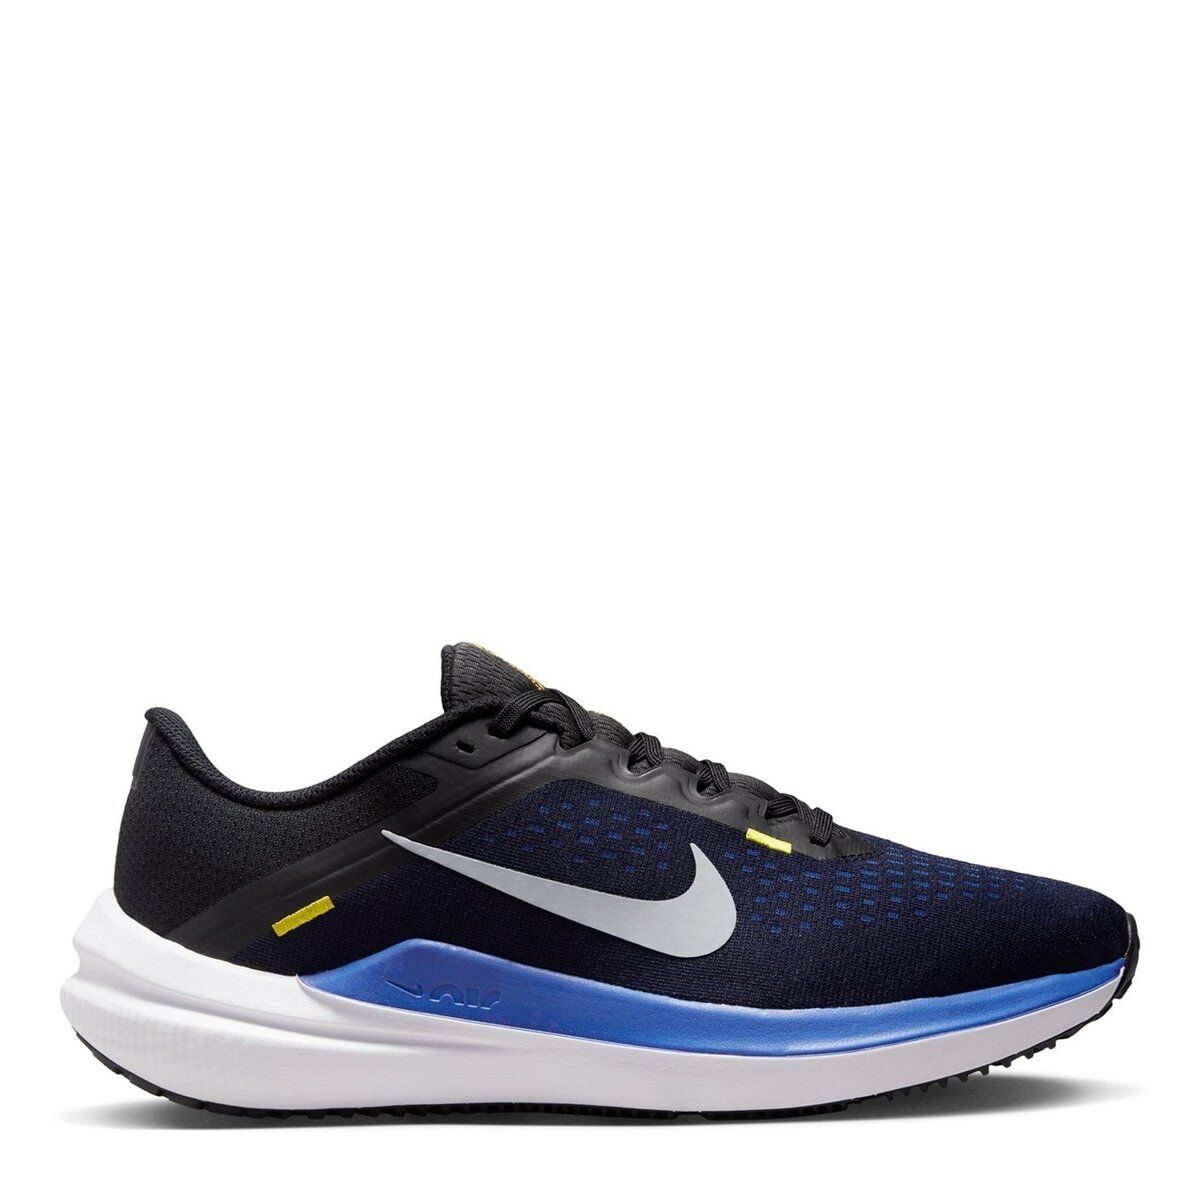 Nike Air Winflo 10 Mens Road Running Shoes - male - Black/Blue - 11